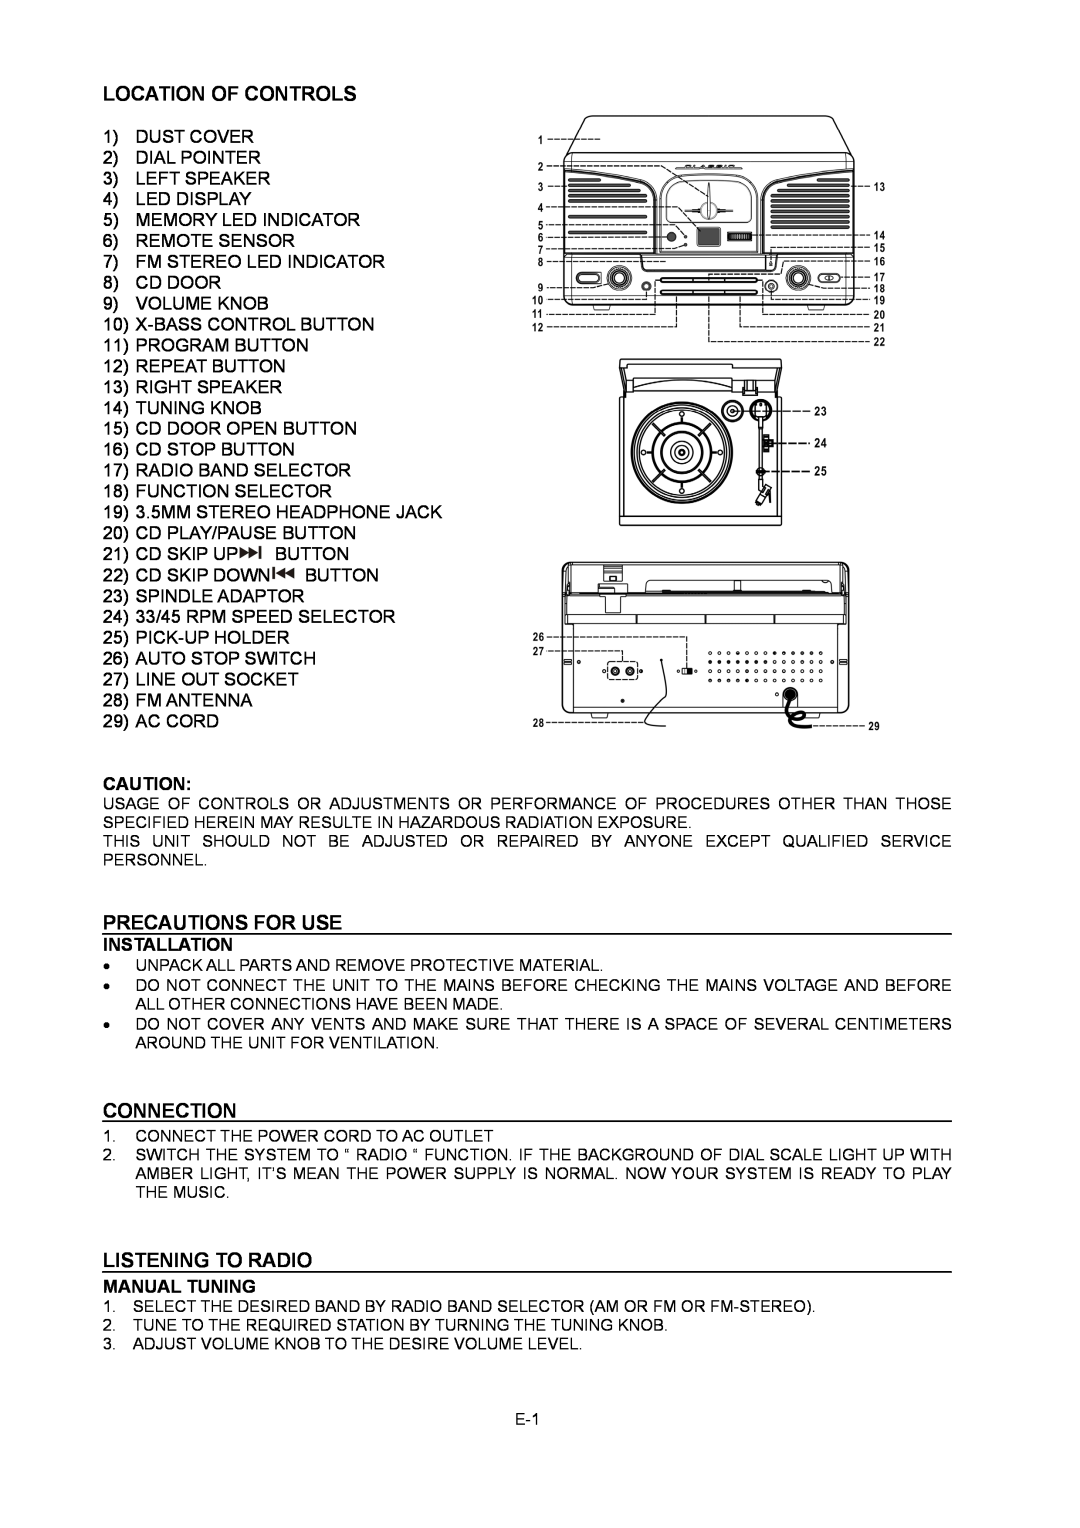 Sylvania SRCD824 Location Of Controls, Precautions For Use, Connection, Listening To Radio, Installation, Manual Tuning 